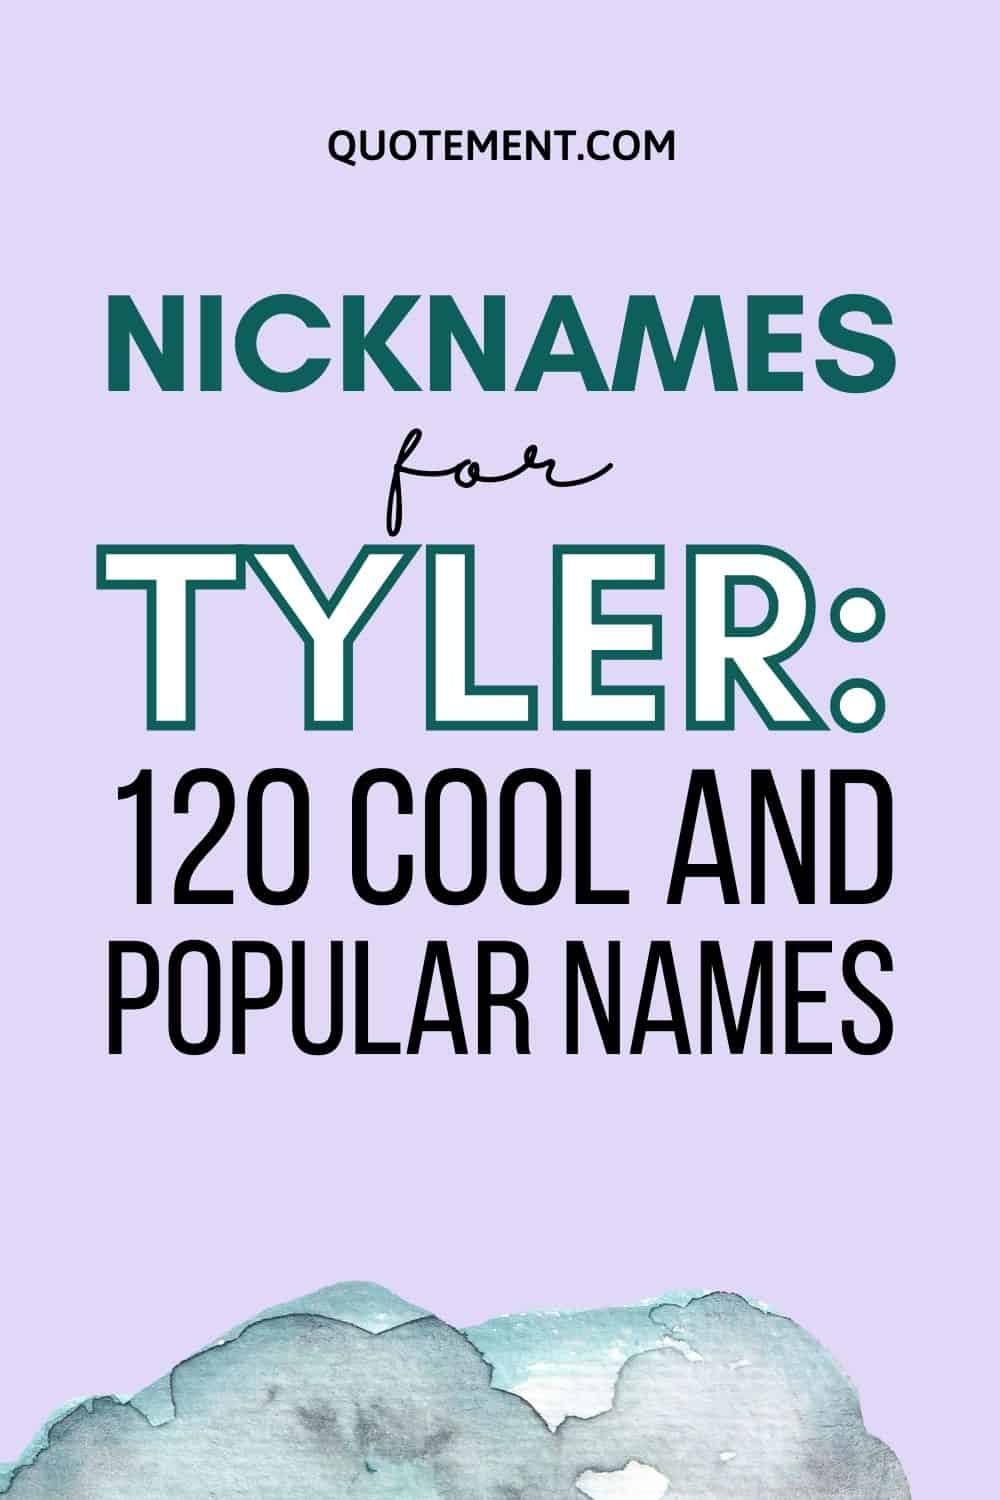 Nicknames For Tyler 120 Cool And Popular Names